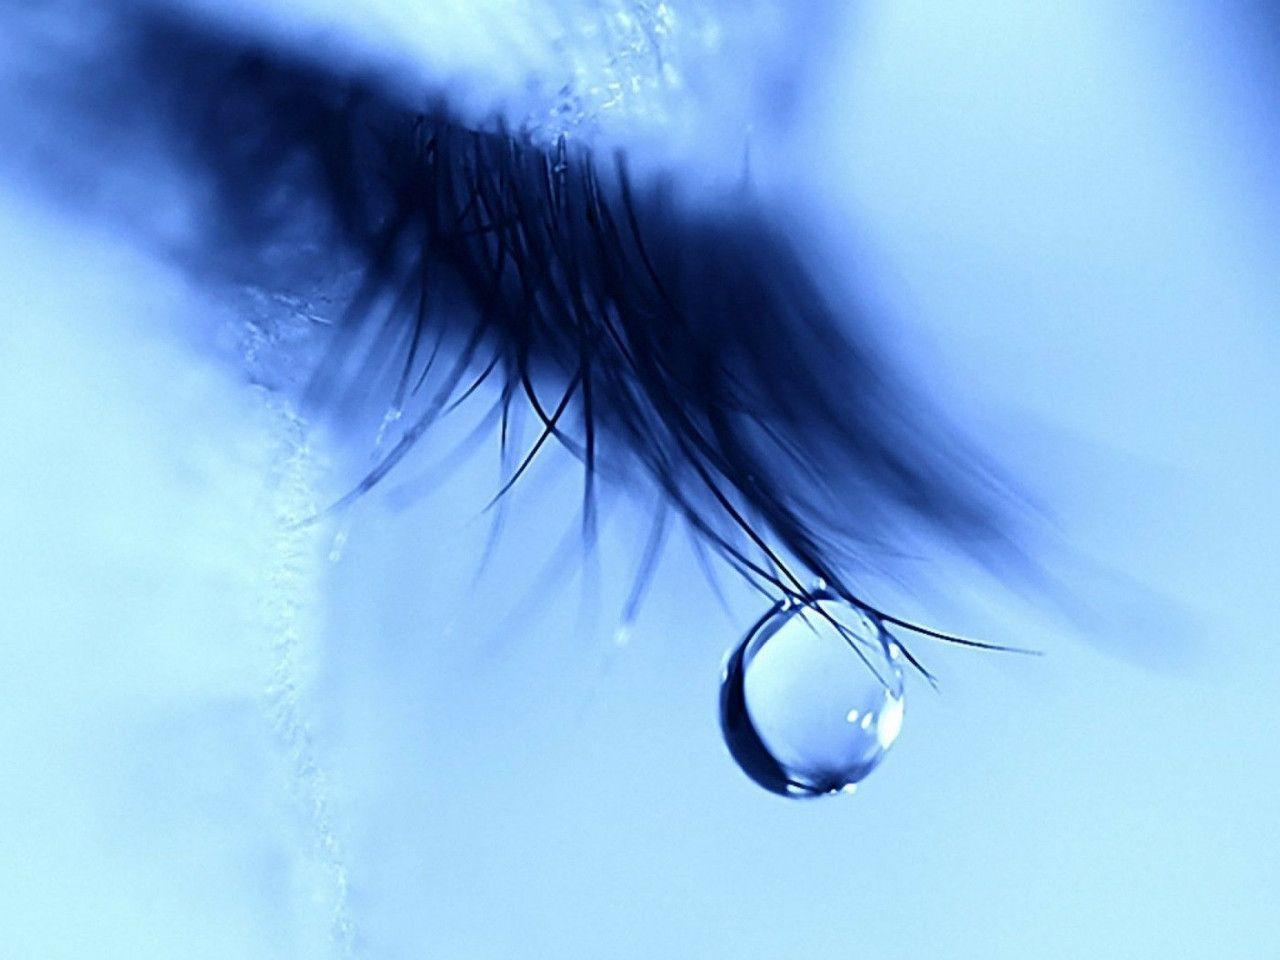 Crying Eyes Wallpapers - Top Free Crying Eyes Backgrounds ...